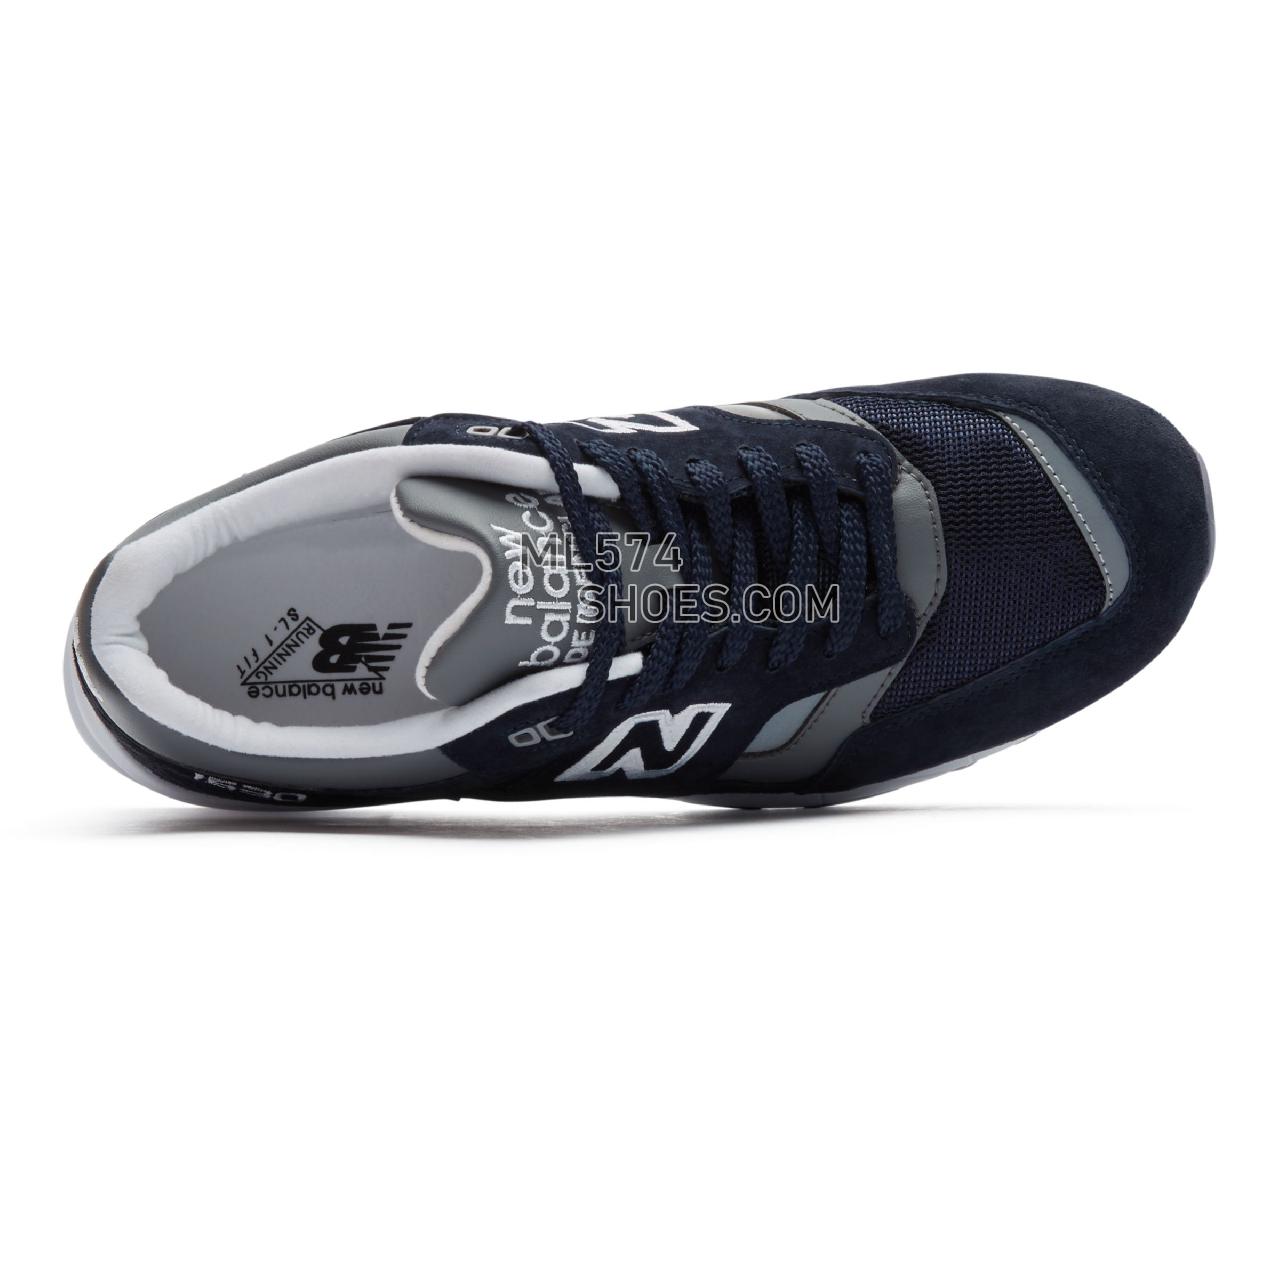 New Balance Made in UK 1530 - Men's Made in UK 1530 - Navy with Grey and White - M1530NVY